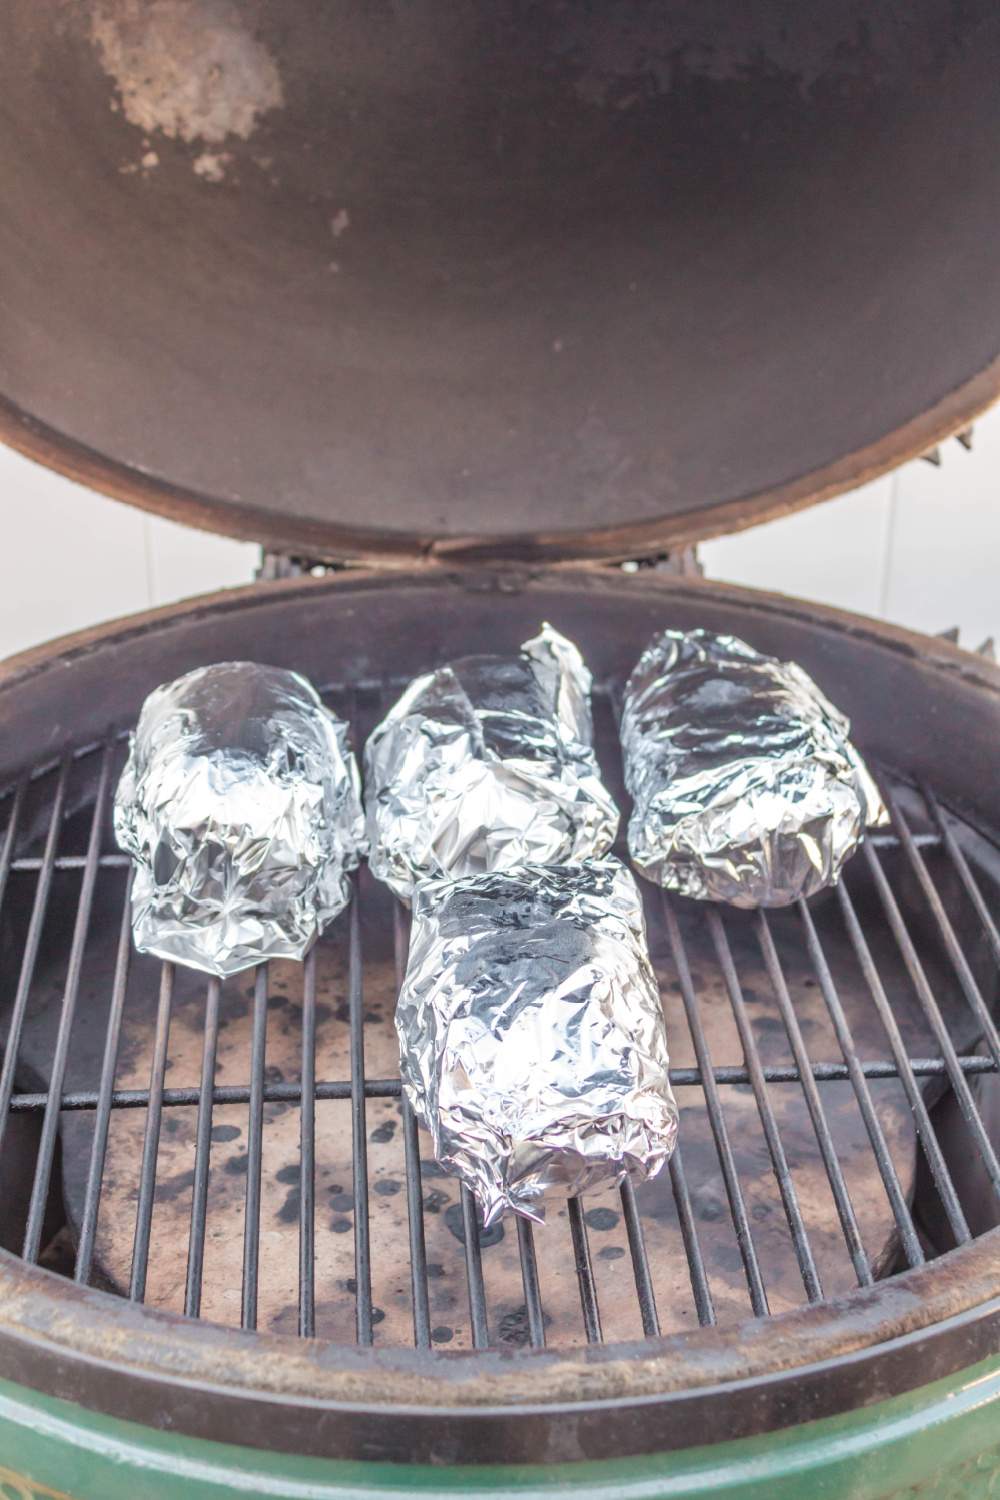 potatoes wrapped in foil on grill